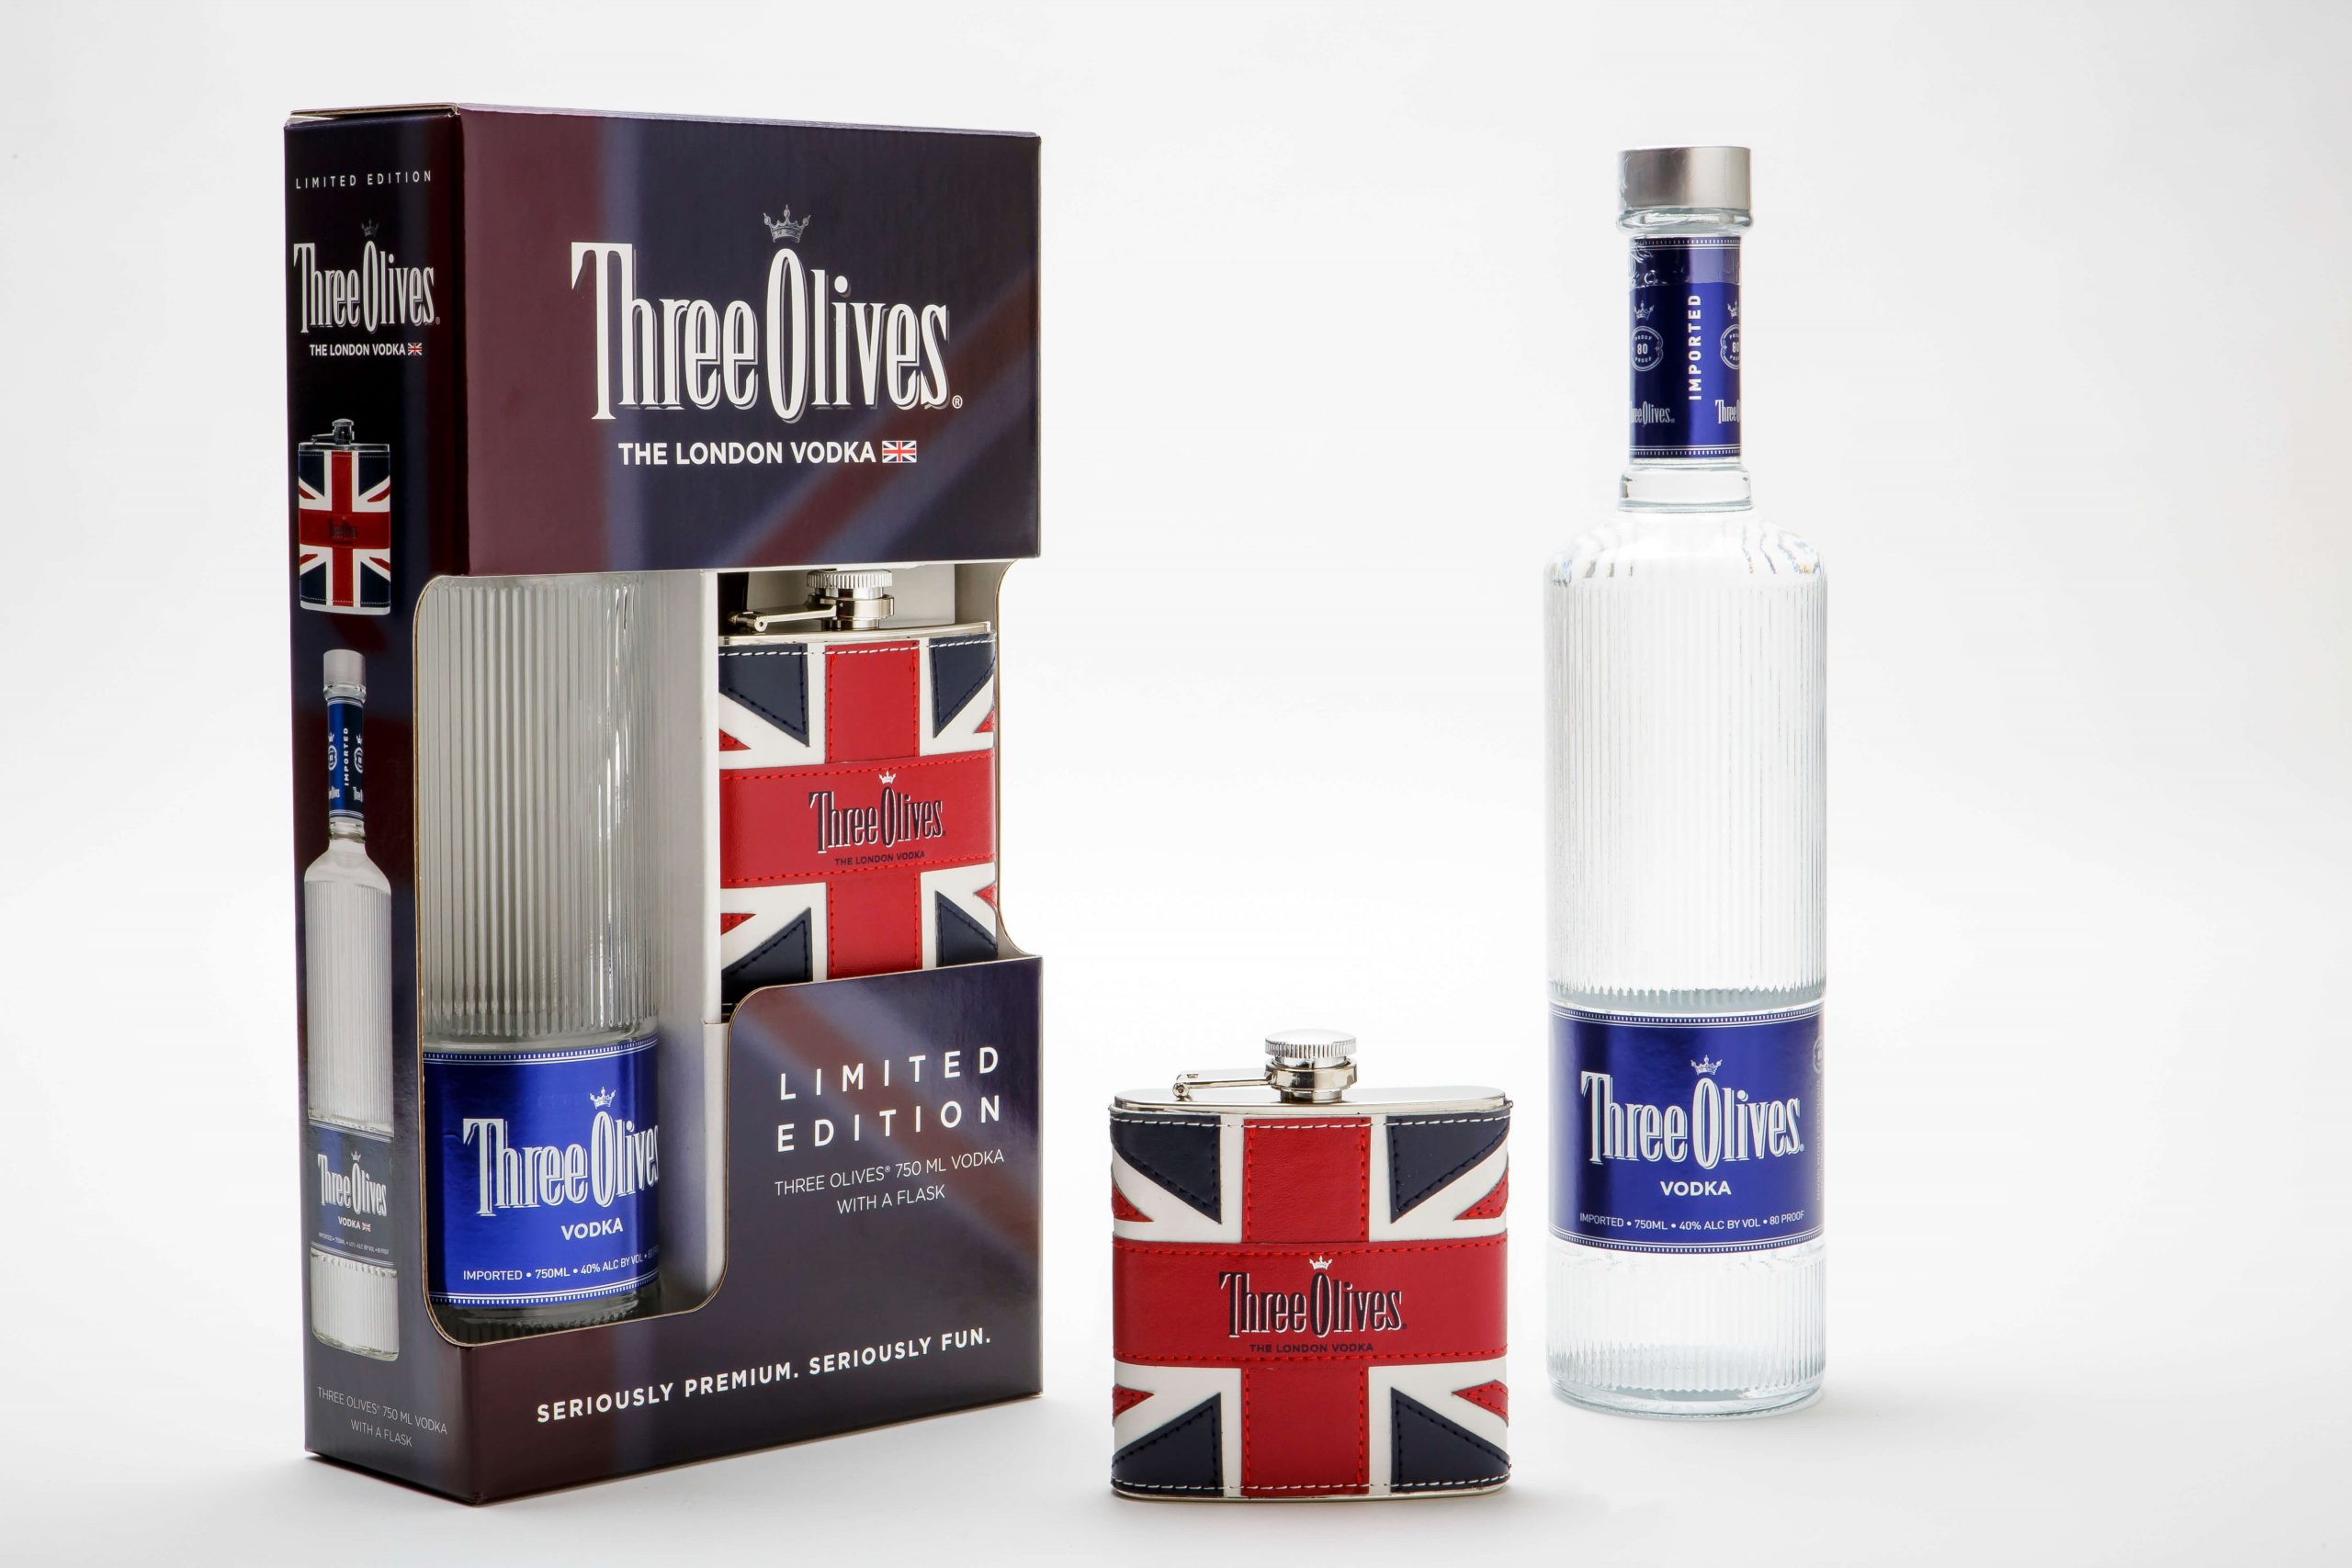 Three Olives liquor bottle and packaging